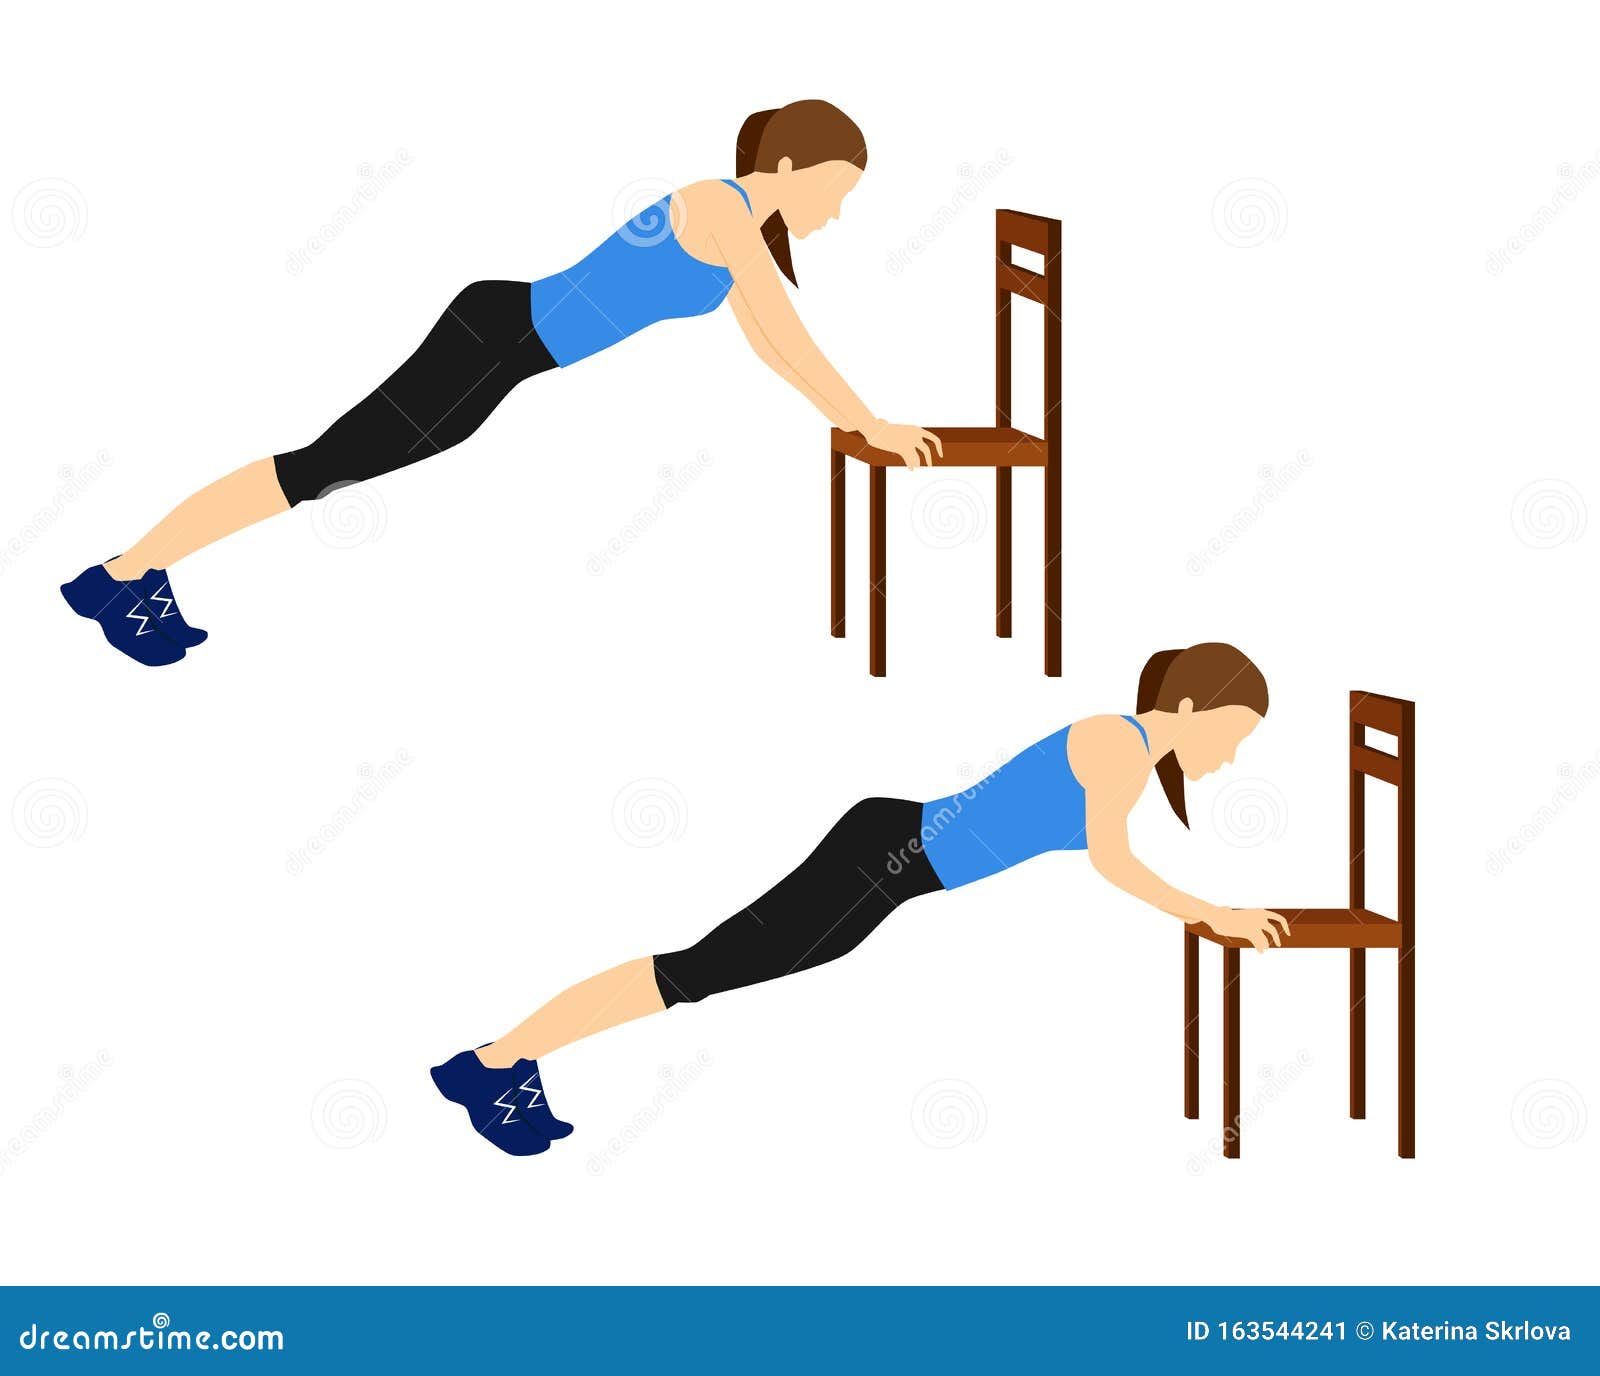 Fitness Exercises For Your Better Workout Chair Push Ups